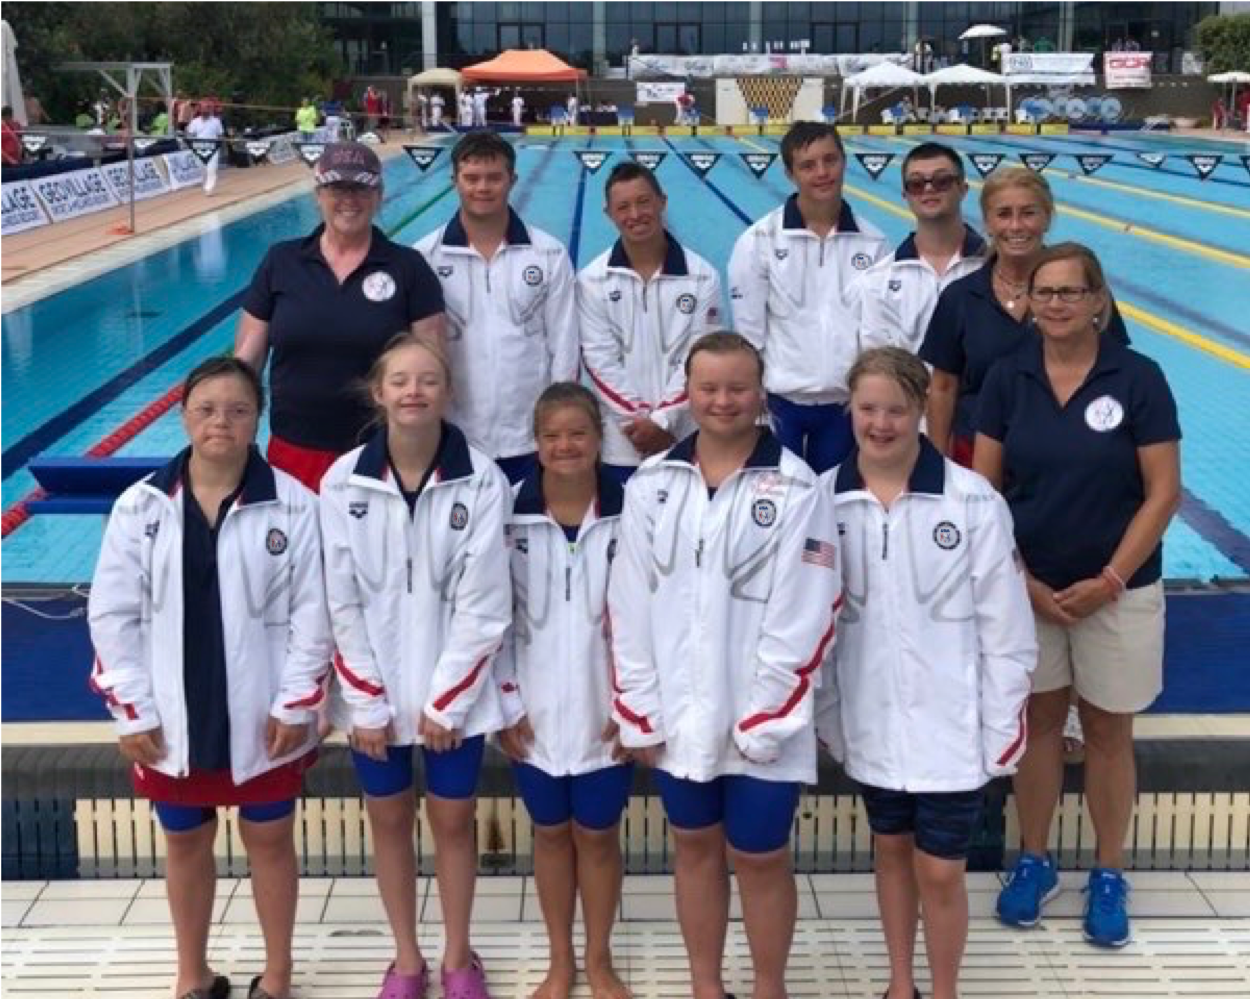 Italy Team in Jackets by Pool USADSS.png